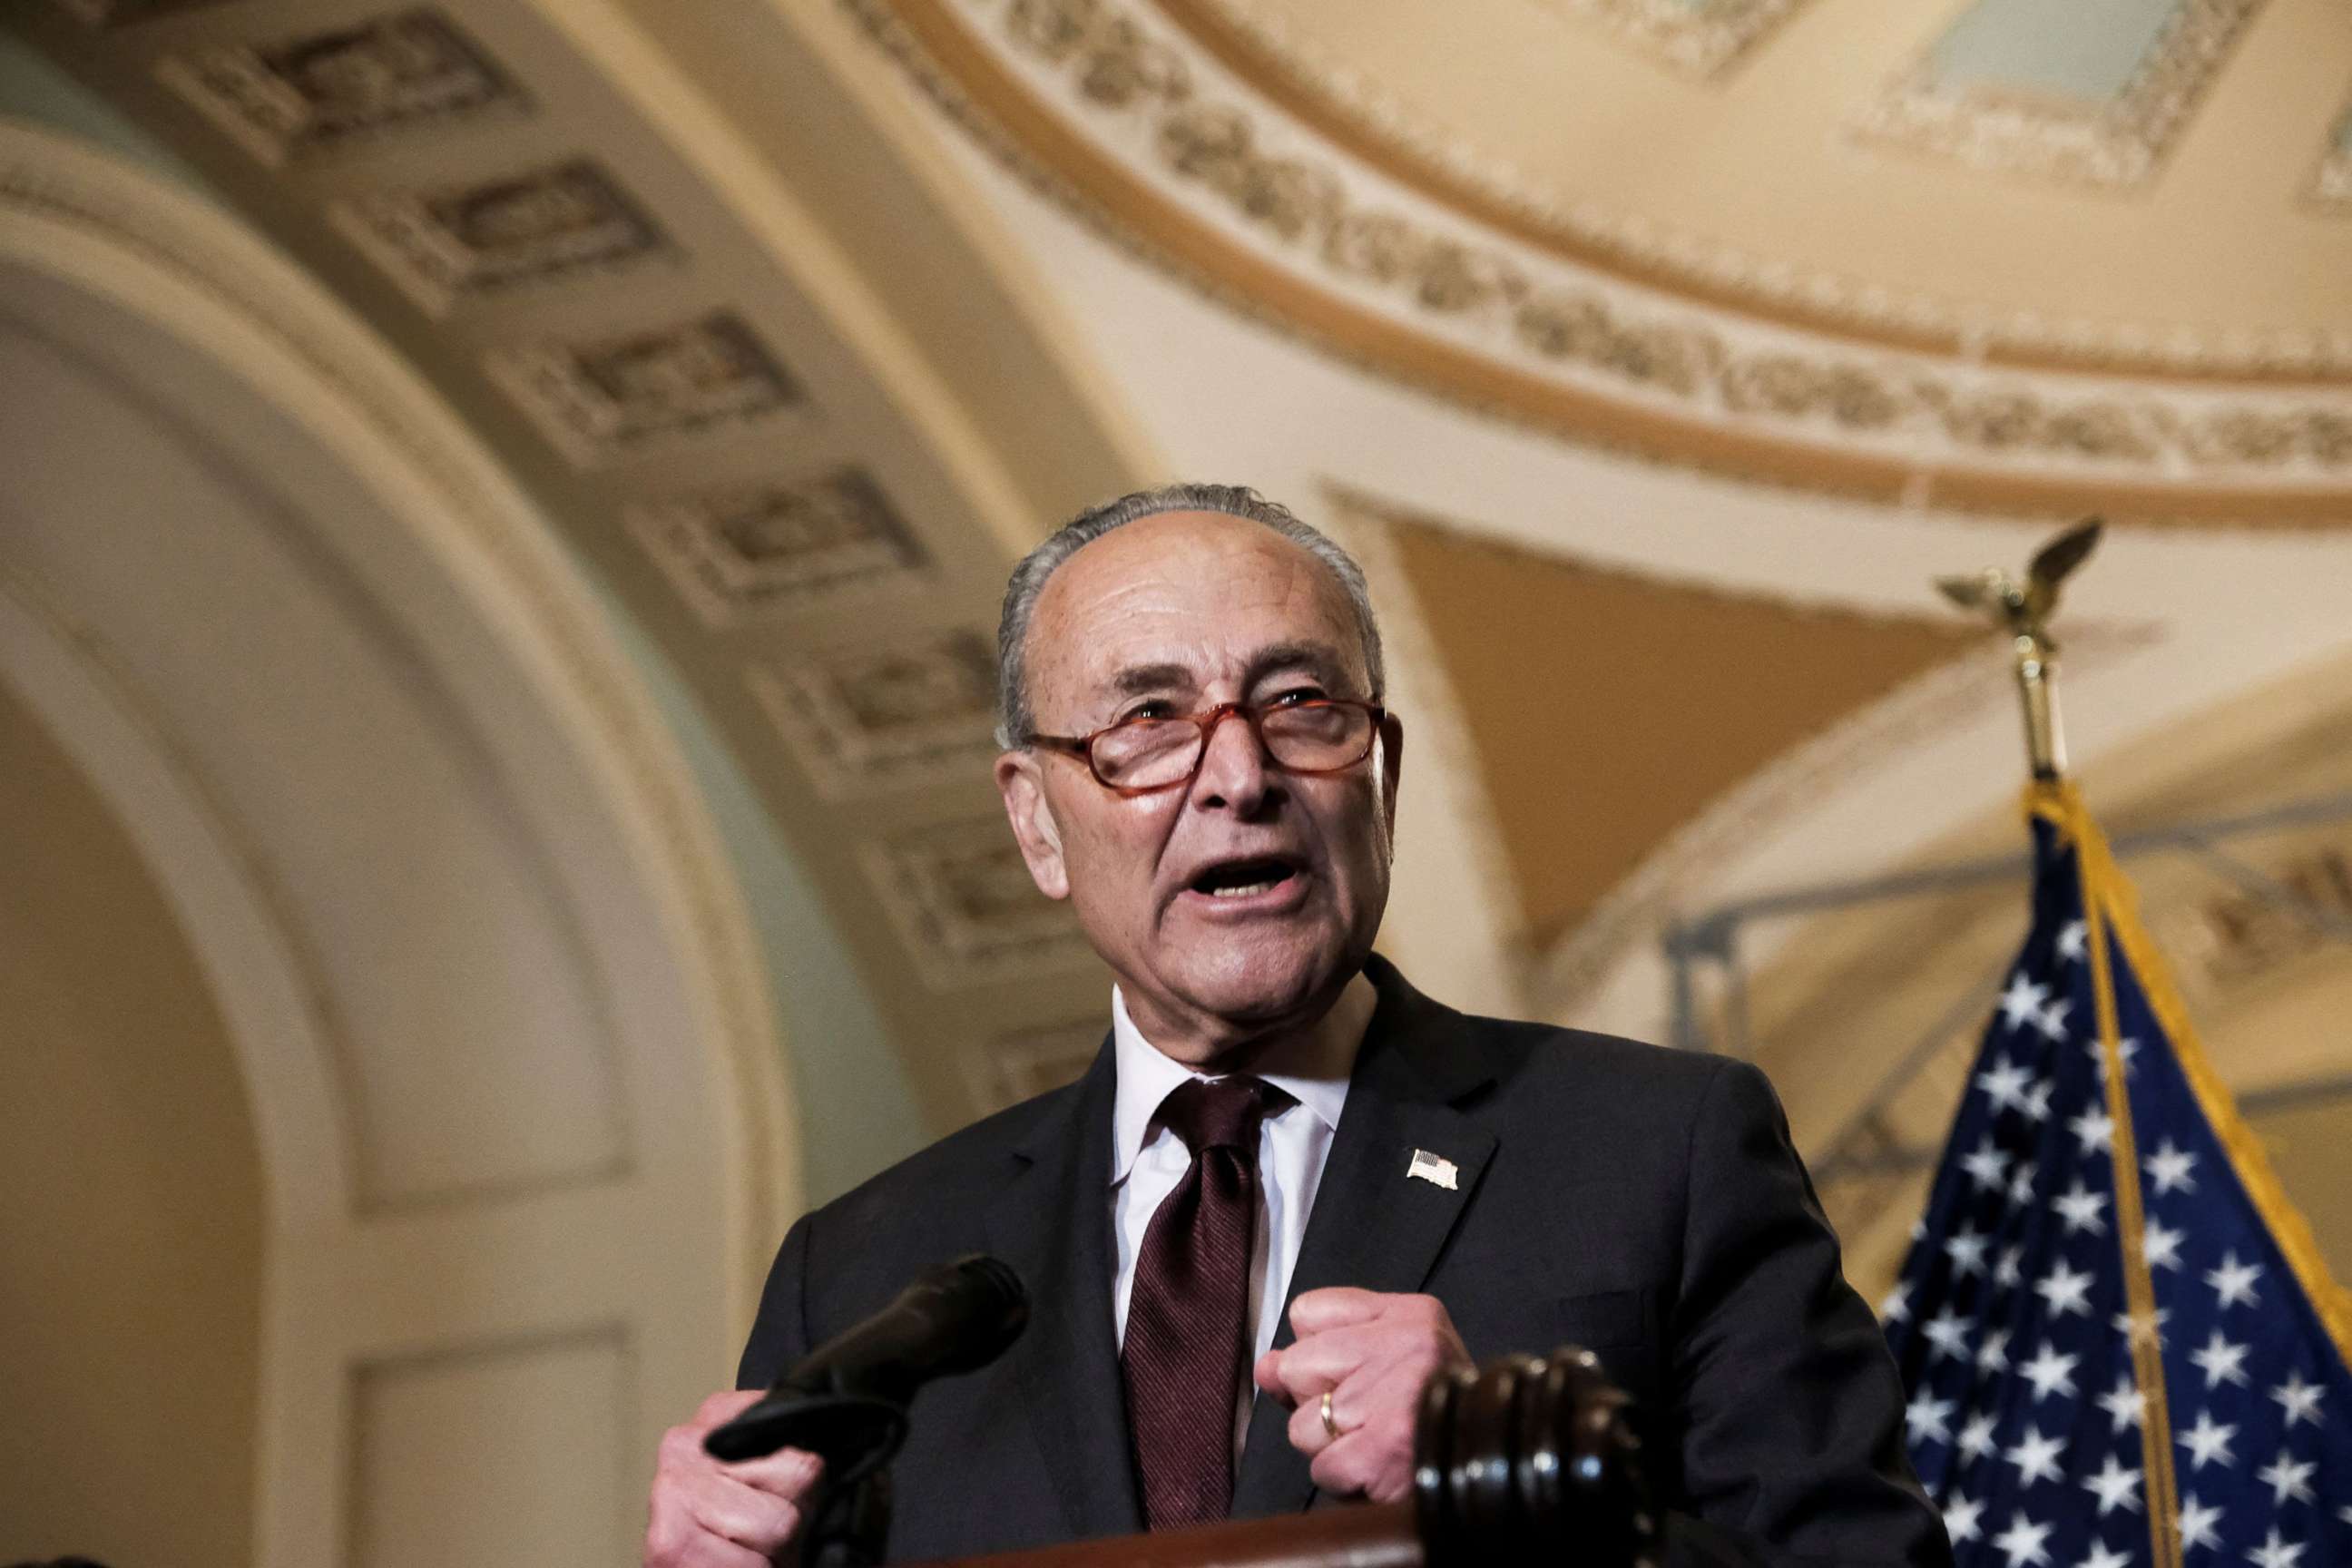 PHOTO: Senate Majority Leader Chuck Schumer speaks to reporters following the Senate Democrats weekly policy lunch at the U.S. Capitol in Washington, D.C., on May 3, 2022.